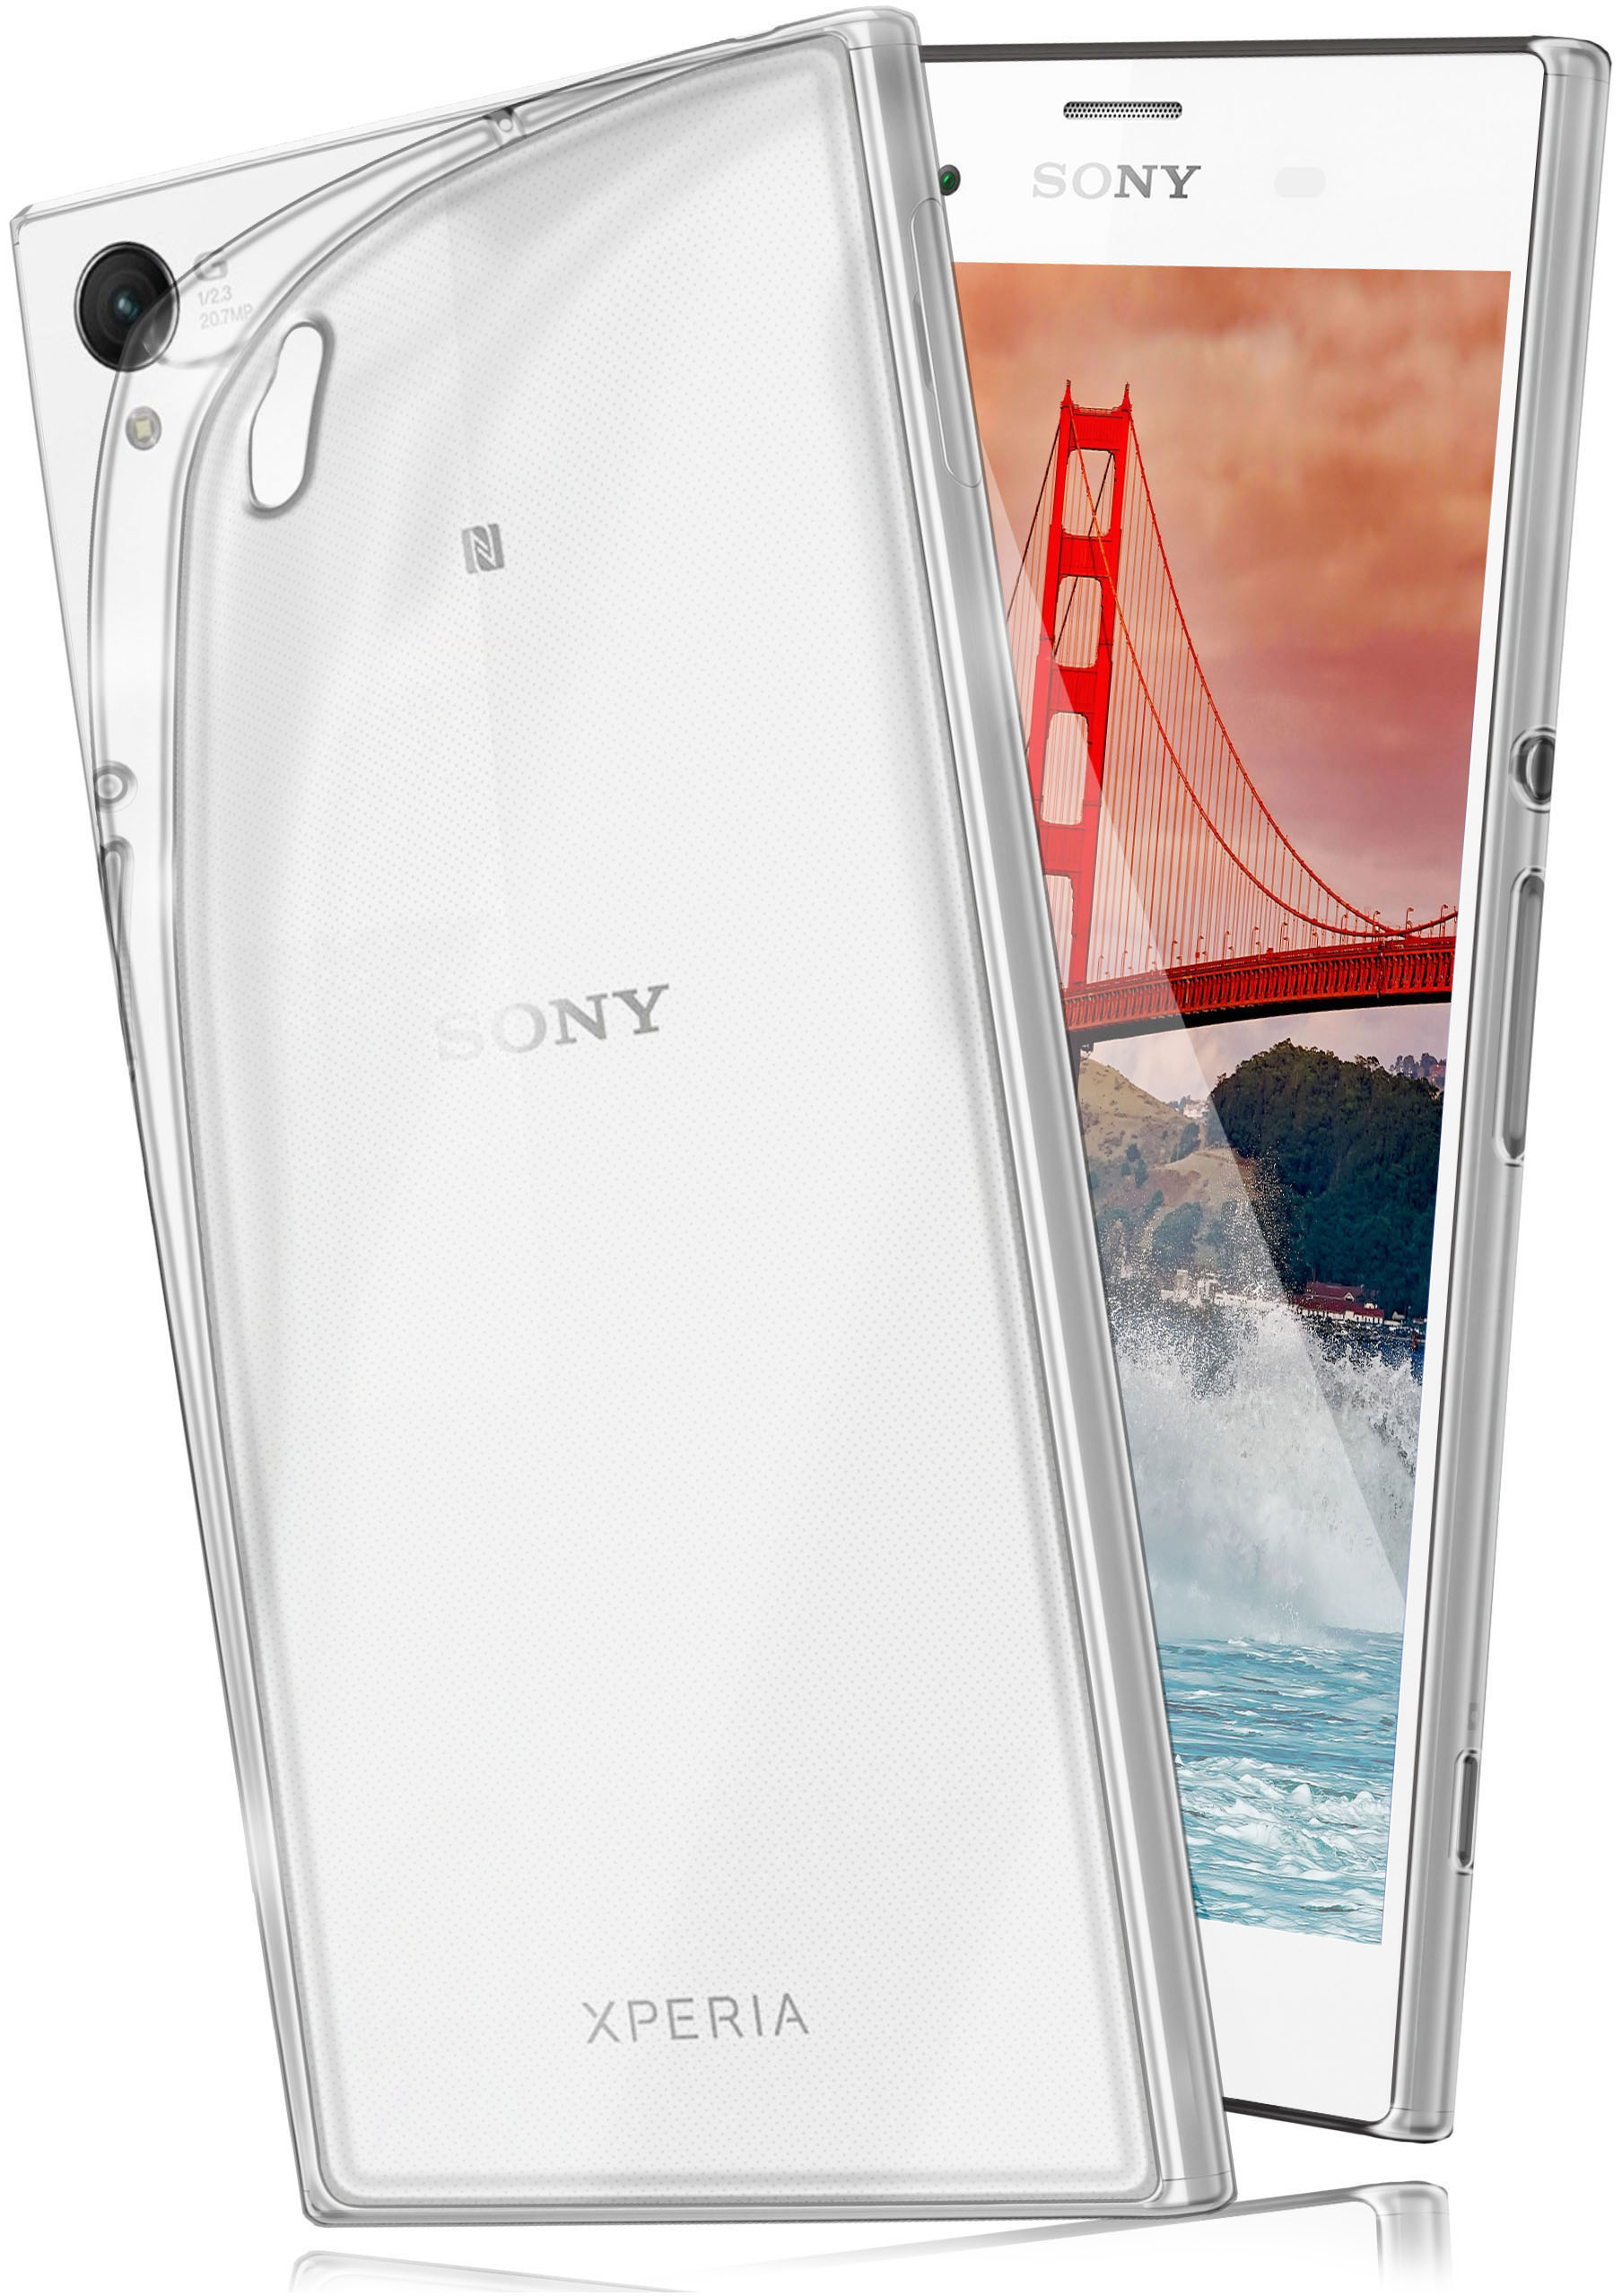 MOEX Aero Case, Sony, Xperia Plus, Z3 Crystal-Clear Backcover